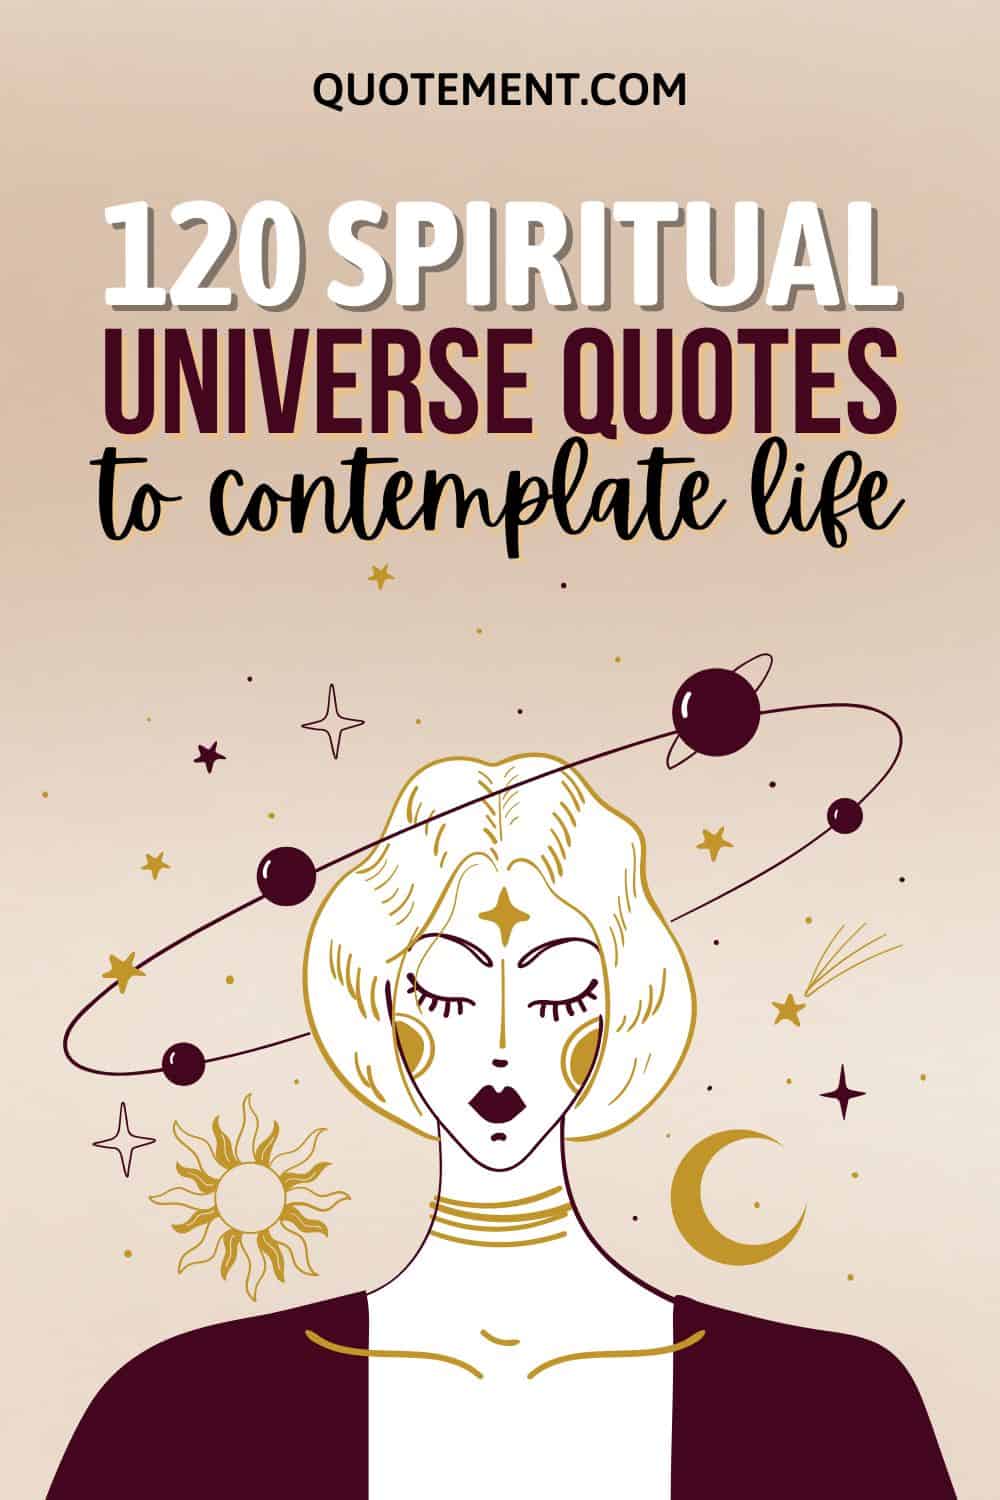 120 Best Spiritual Universe Quotes To Contemplate Life
